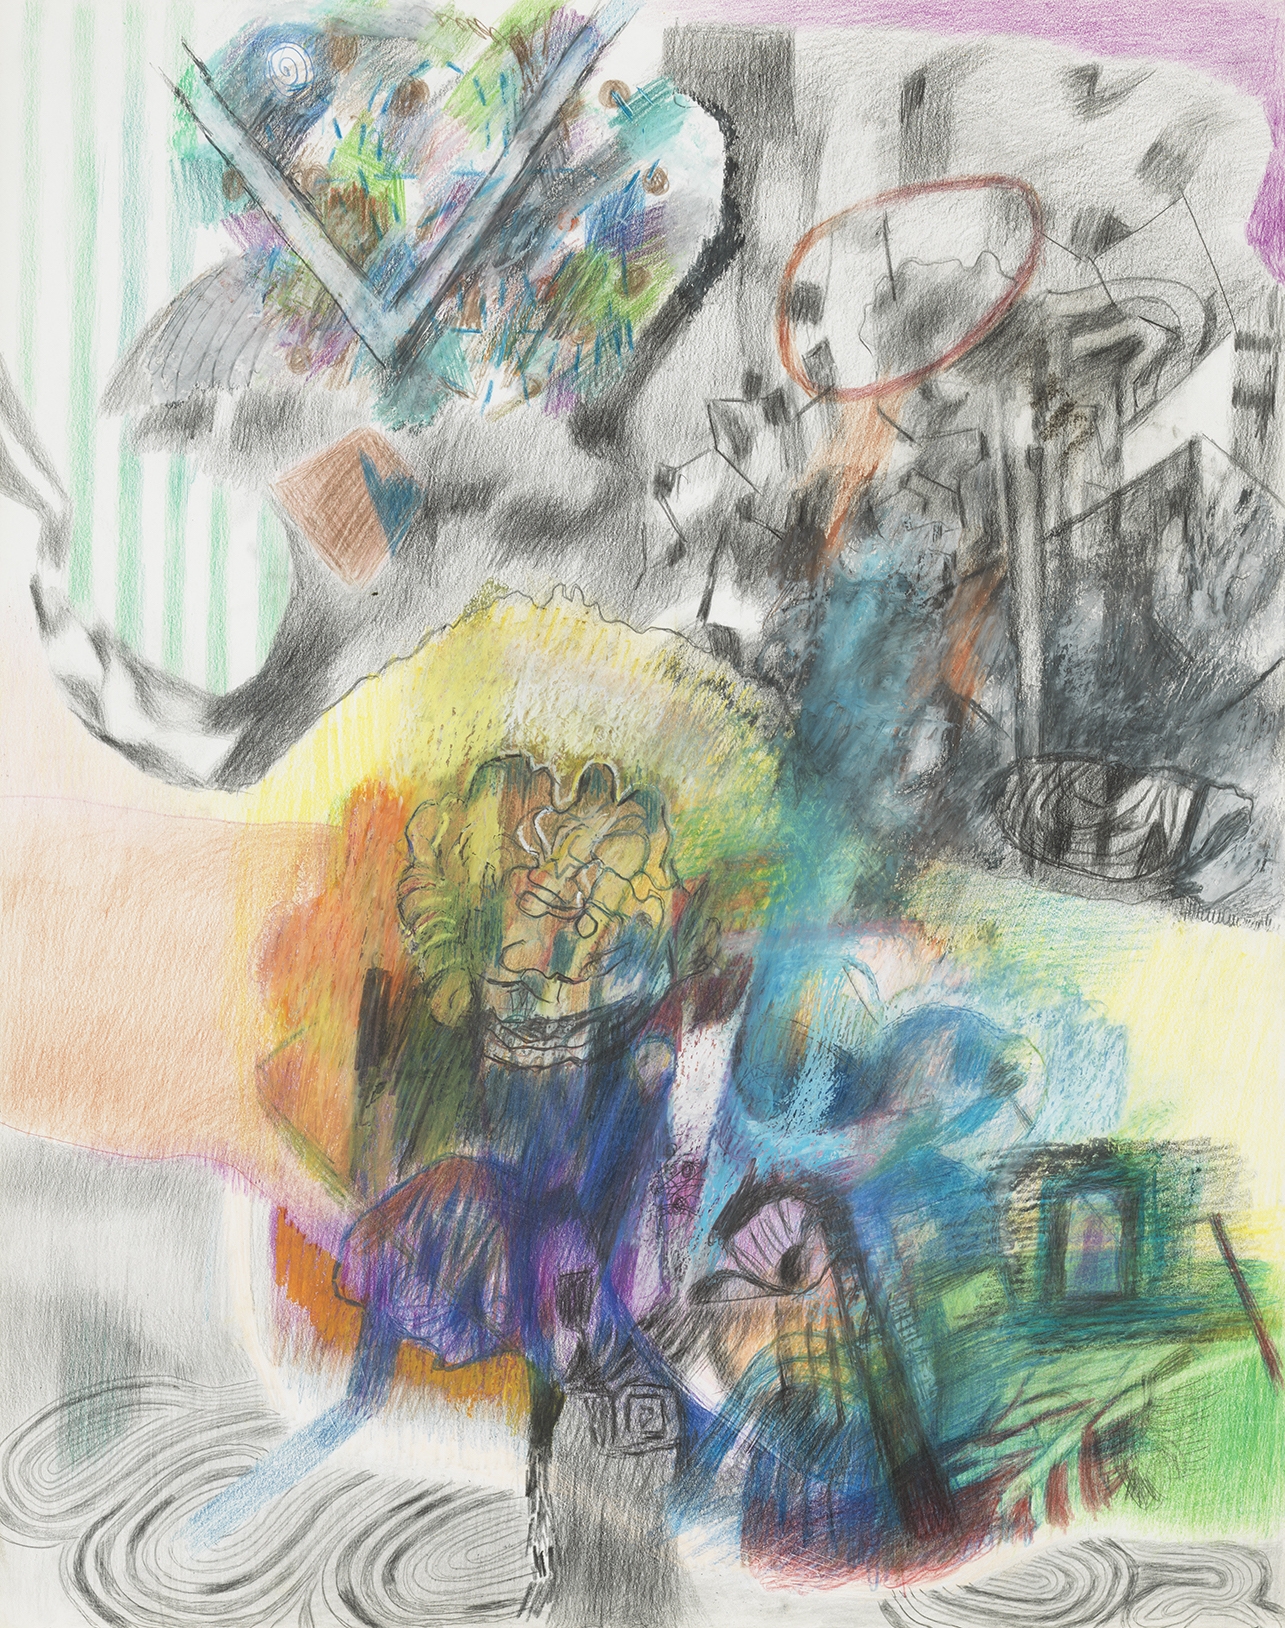 Imaginary Brooklyn Flowerscape, 2014

Prismacolor, charcoal and oil pastel on paper

24 x 18 inches